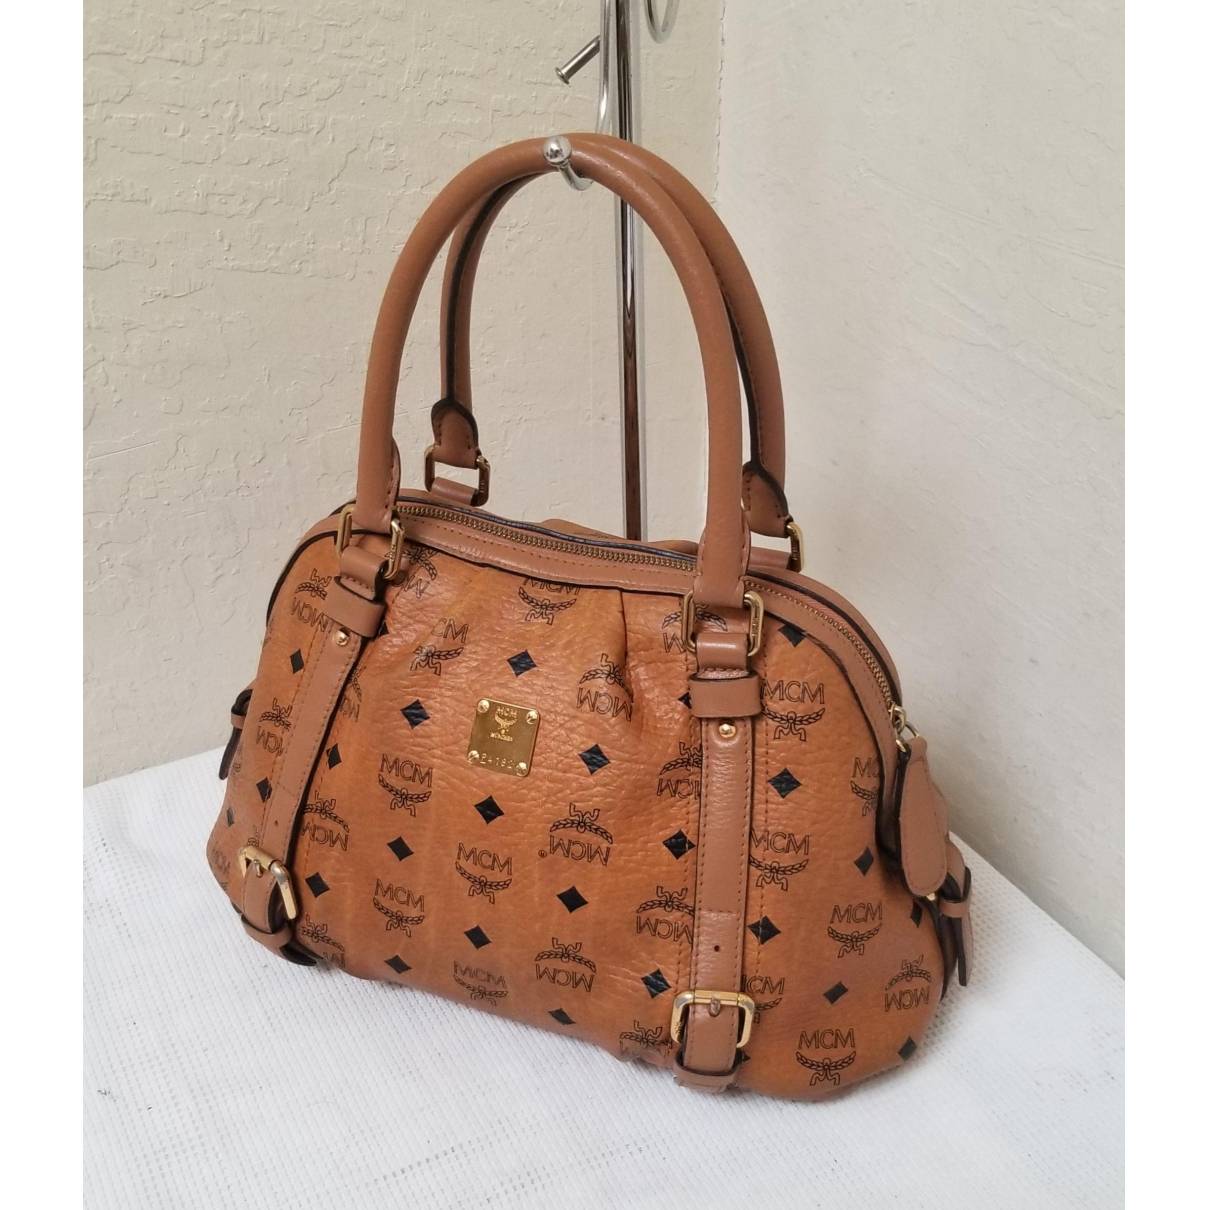 Mcm - Authenticated Handbag - Leather Brown for Women, Good Condition